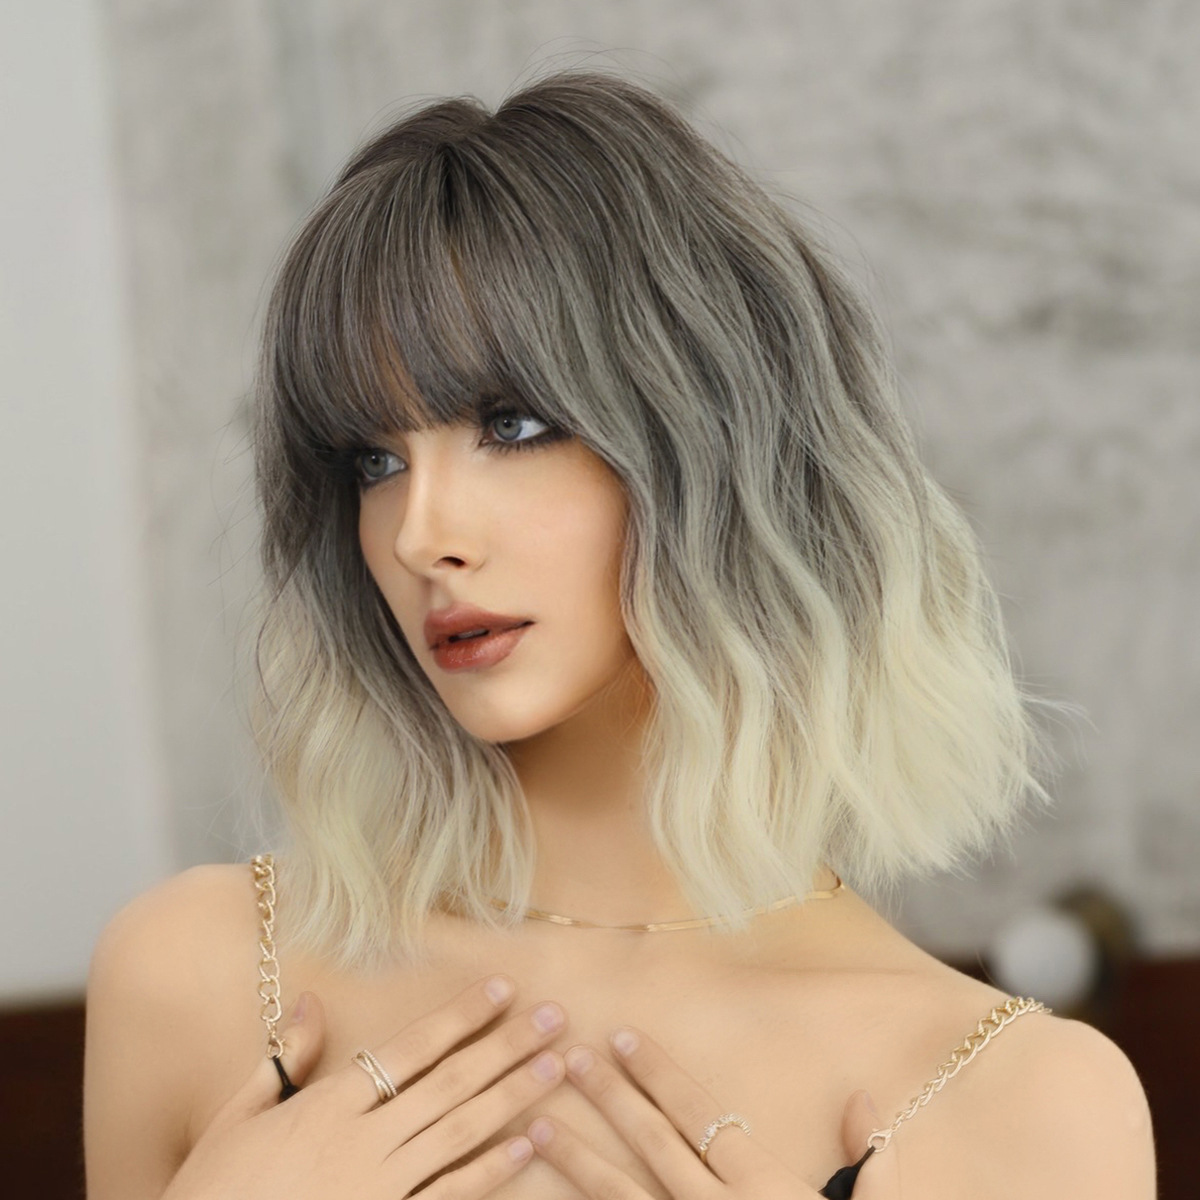 Yinraohai synthetic wig for women, featuring stylish short wavy silver-white hair with dyed Japanese and Korean bangs, gradient effect, ready to go